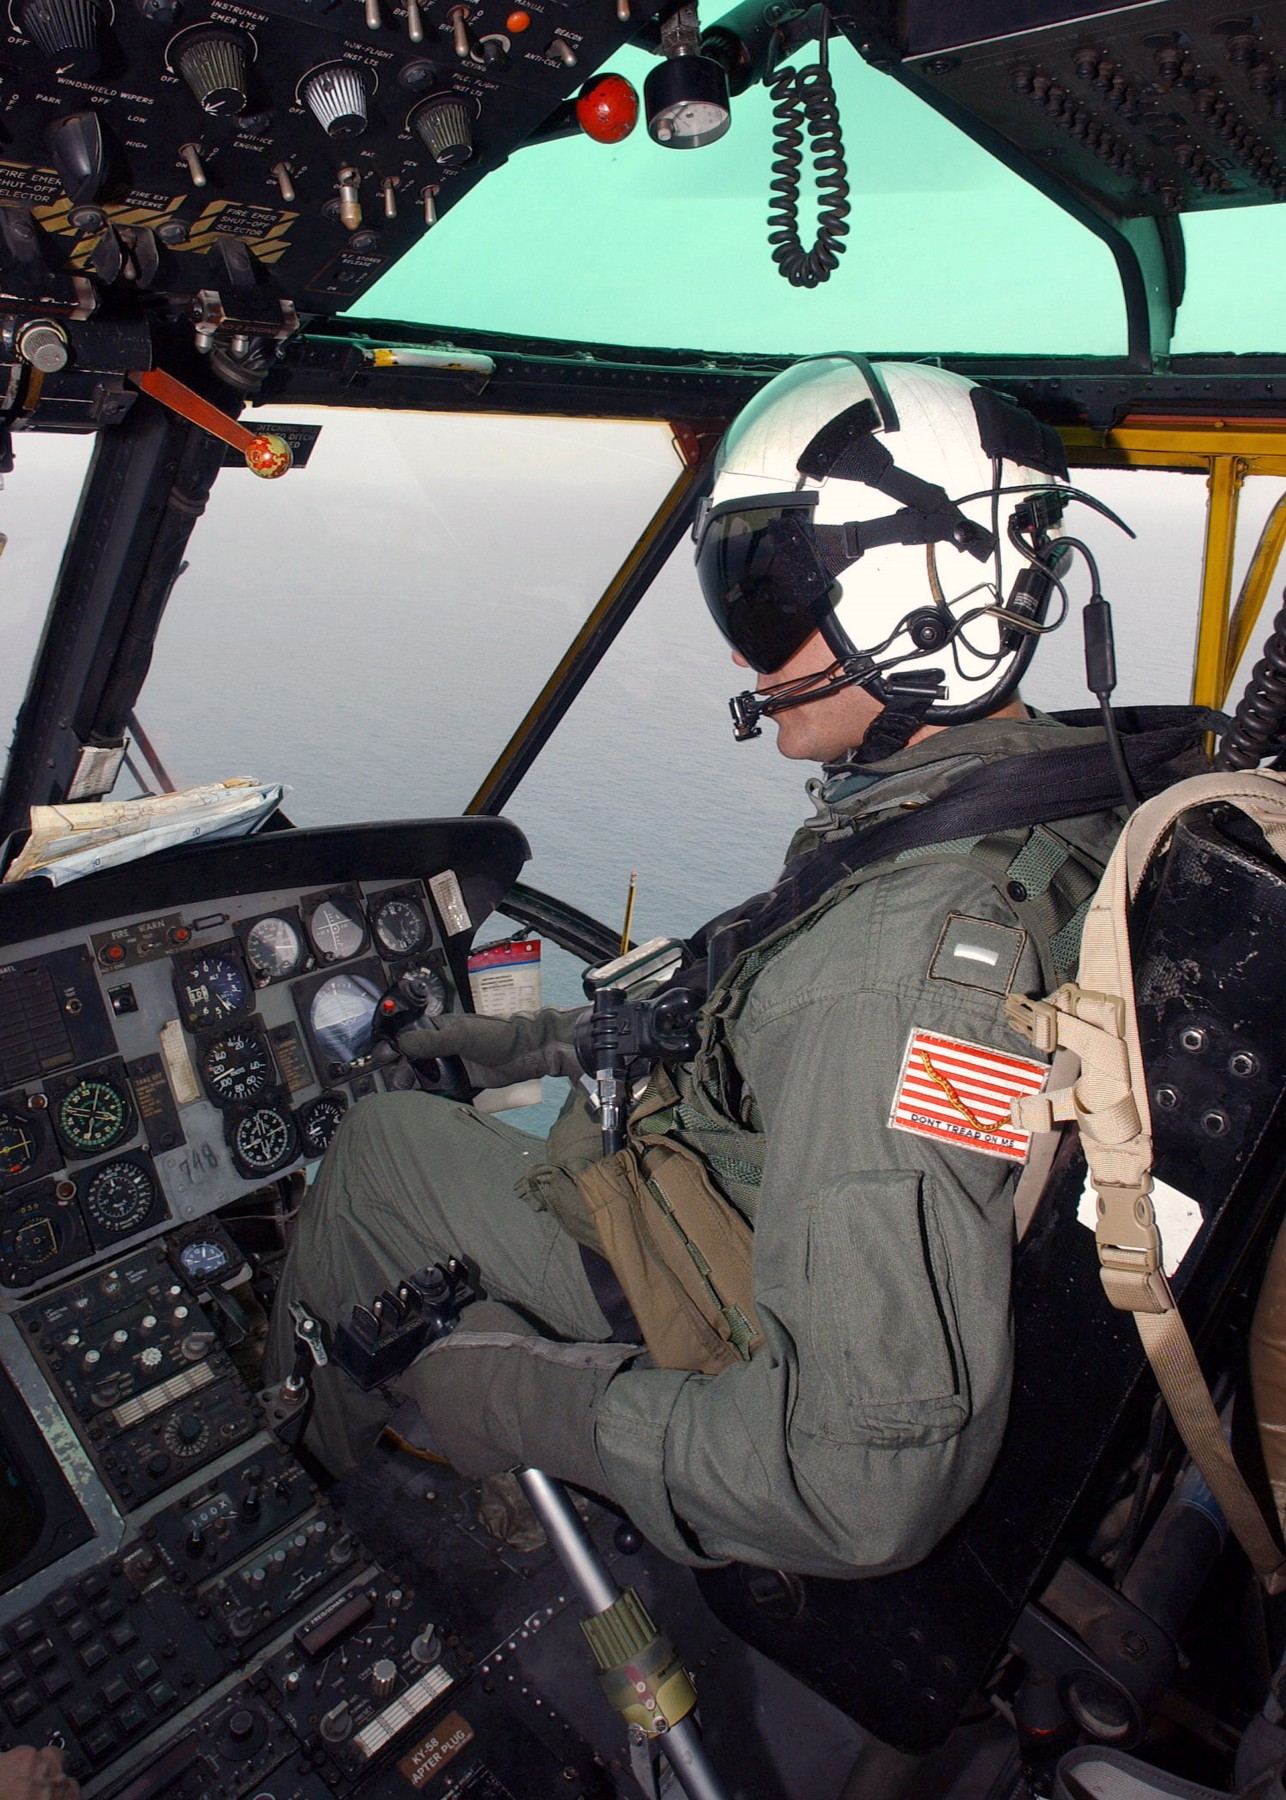 hc-2 fleet angels helicopter combat support squadron us navy uh-3h sea king 14 cockpit